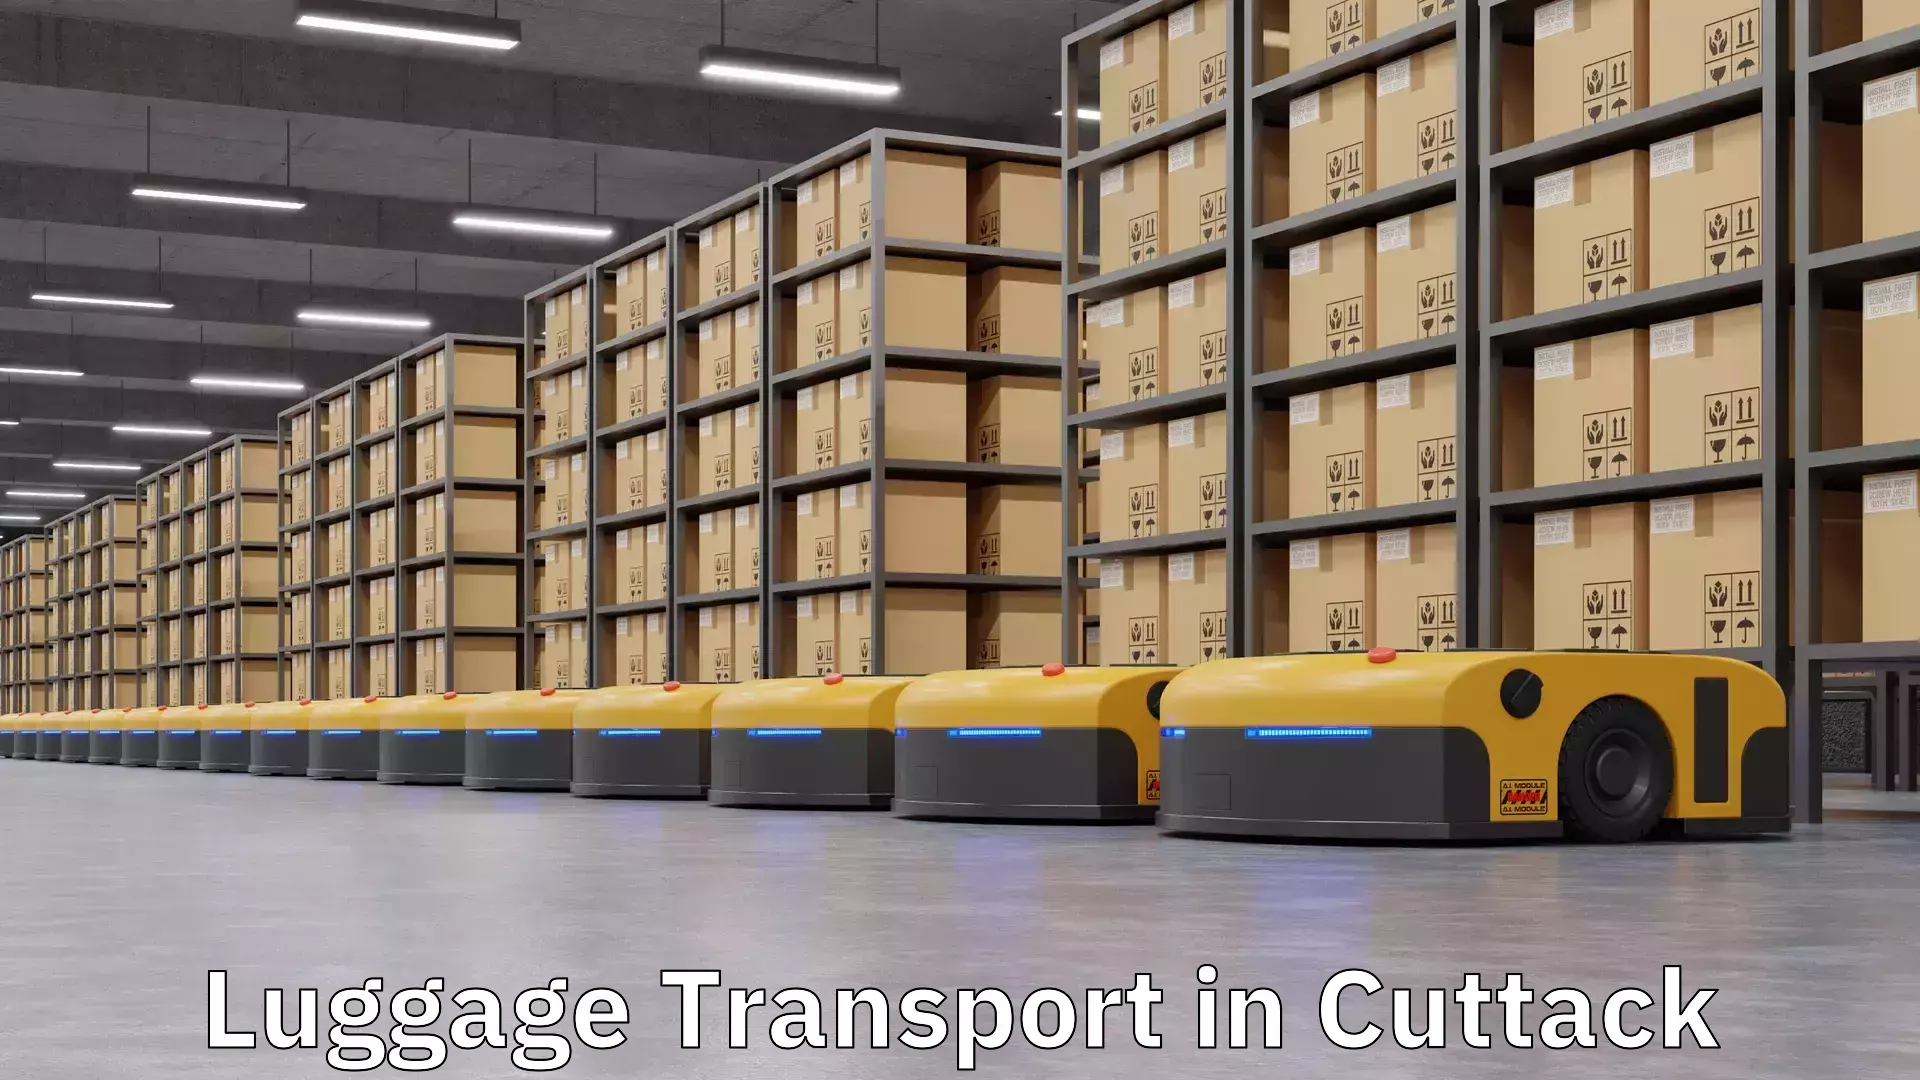 Luggage shipment tracking in Cuttack